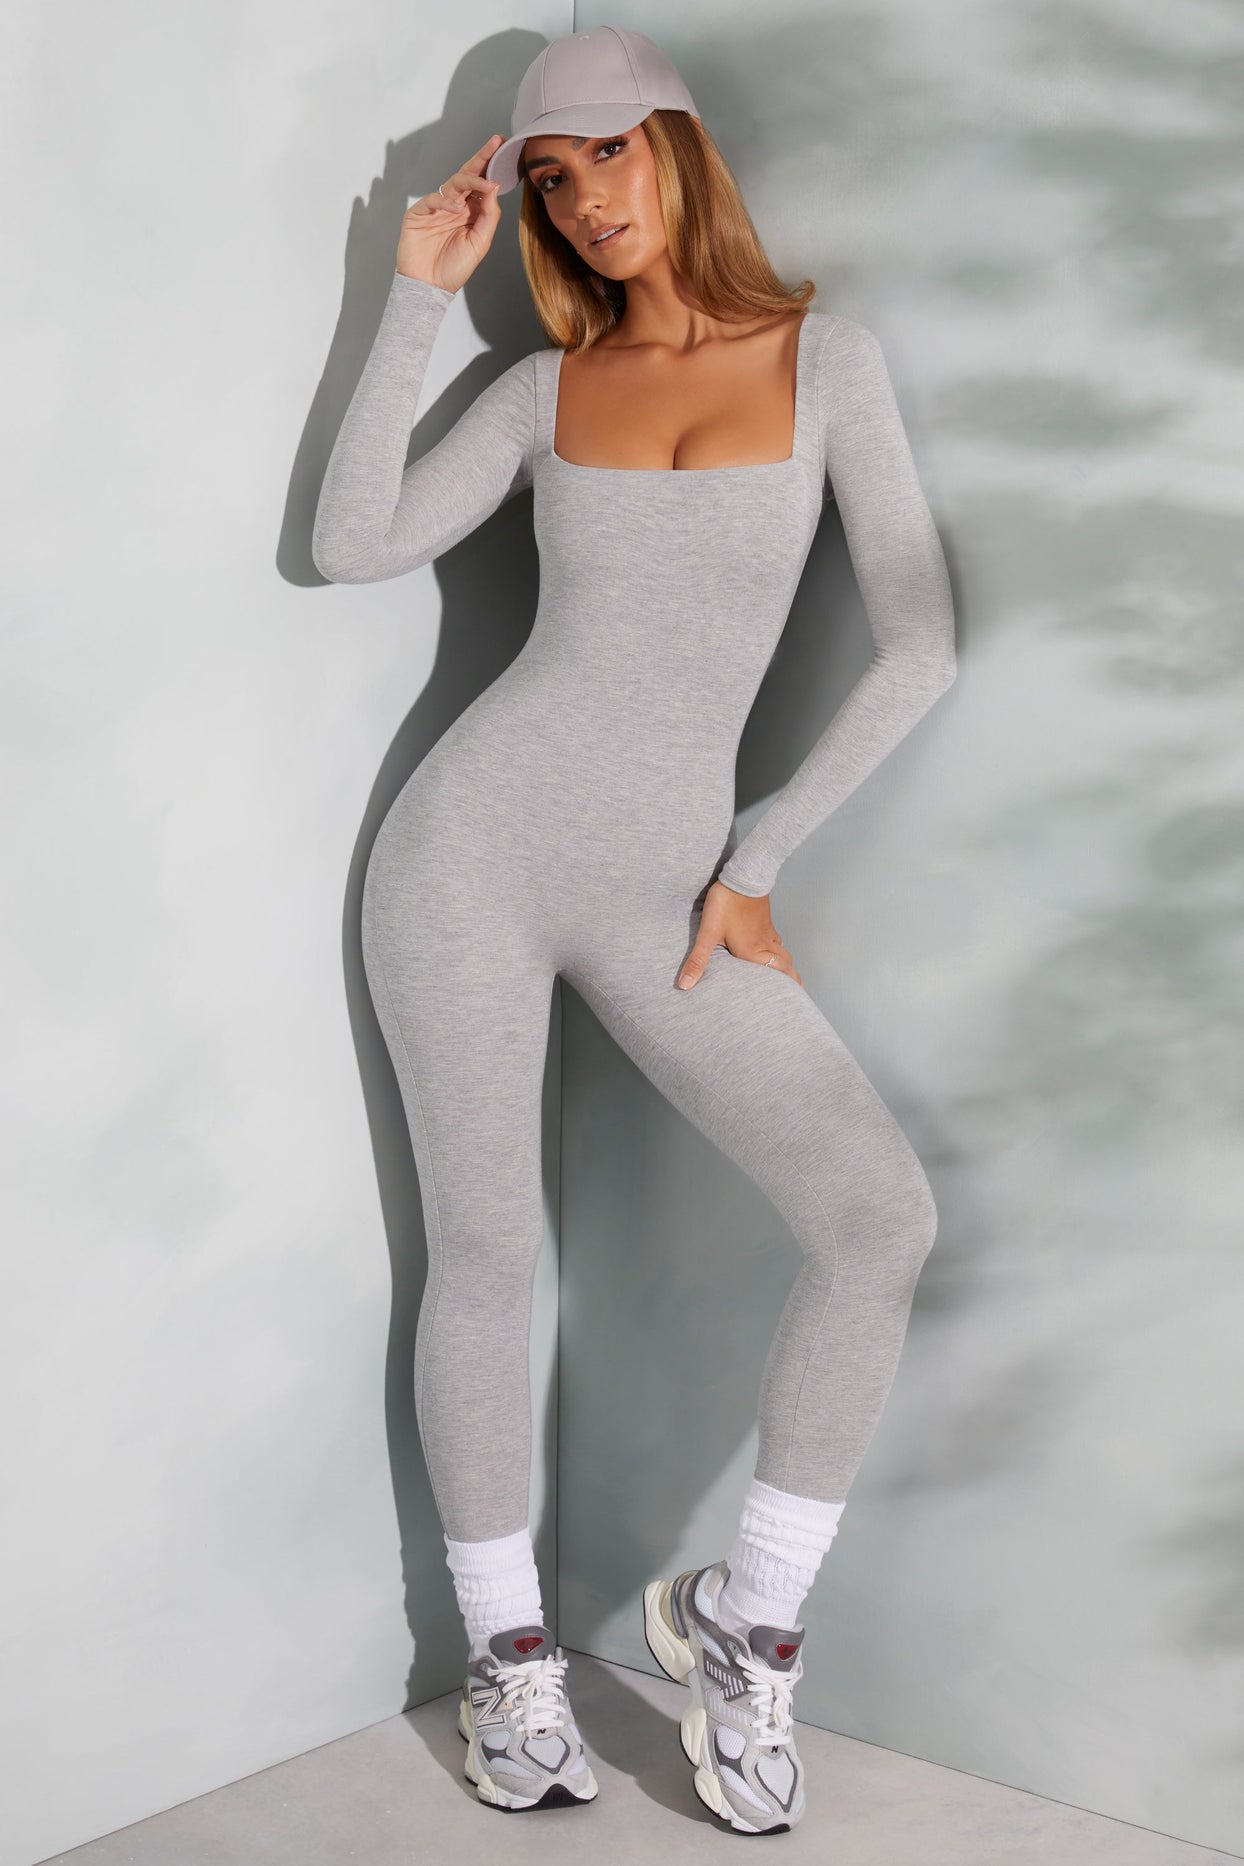 Women Ribbed Knit Yoga Jumpsuits Long Sleeve Square Neck Bodycon